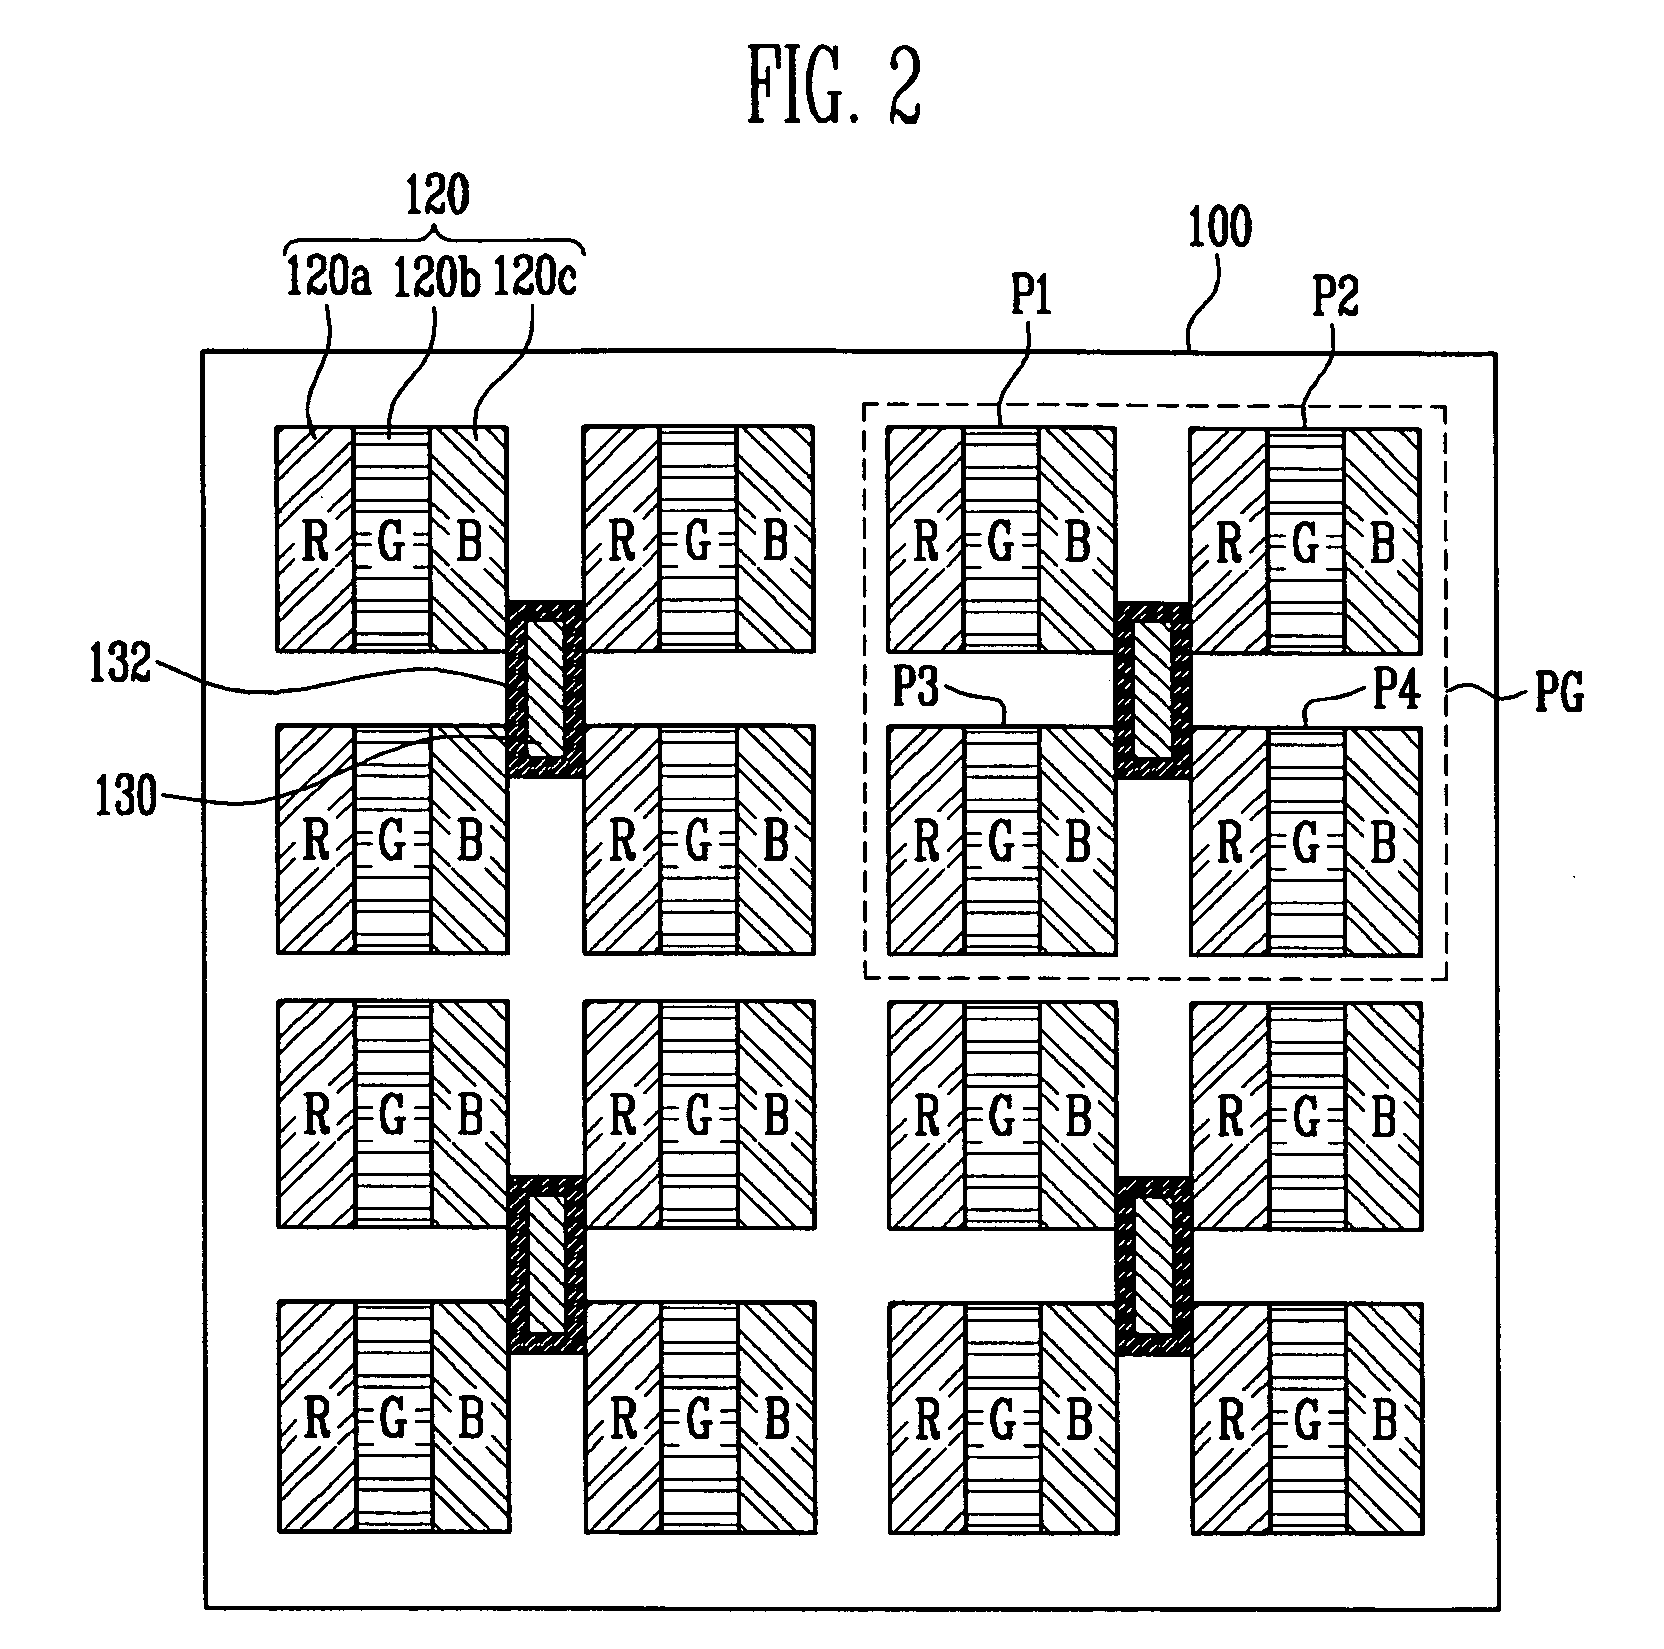 Sensor scan drivers, flat panel displays with built-in touch screen including such a sensor scan driver, and methods of driving such flat panel displays